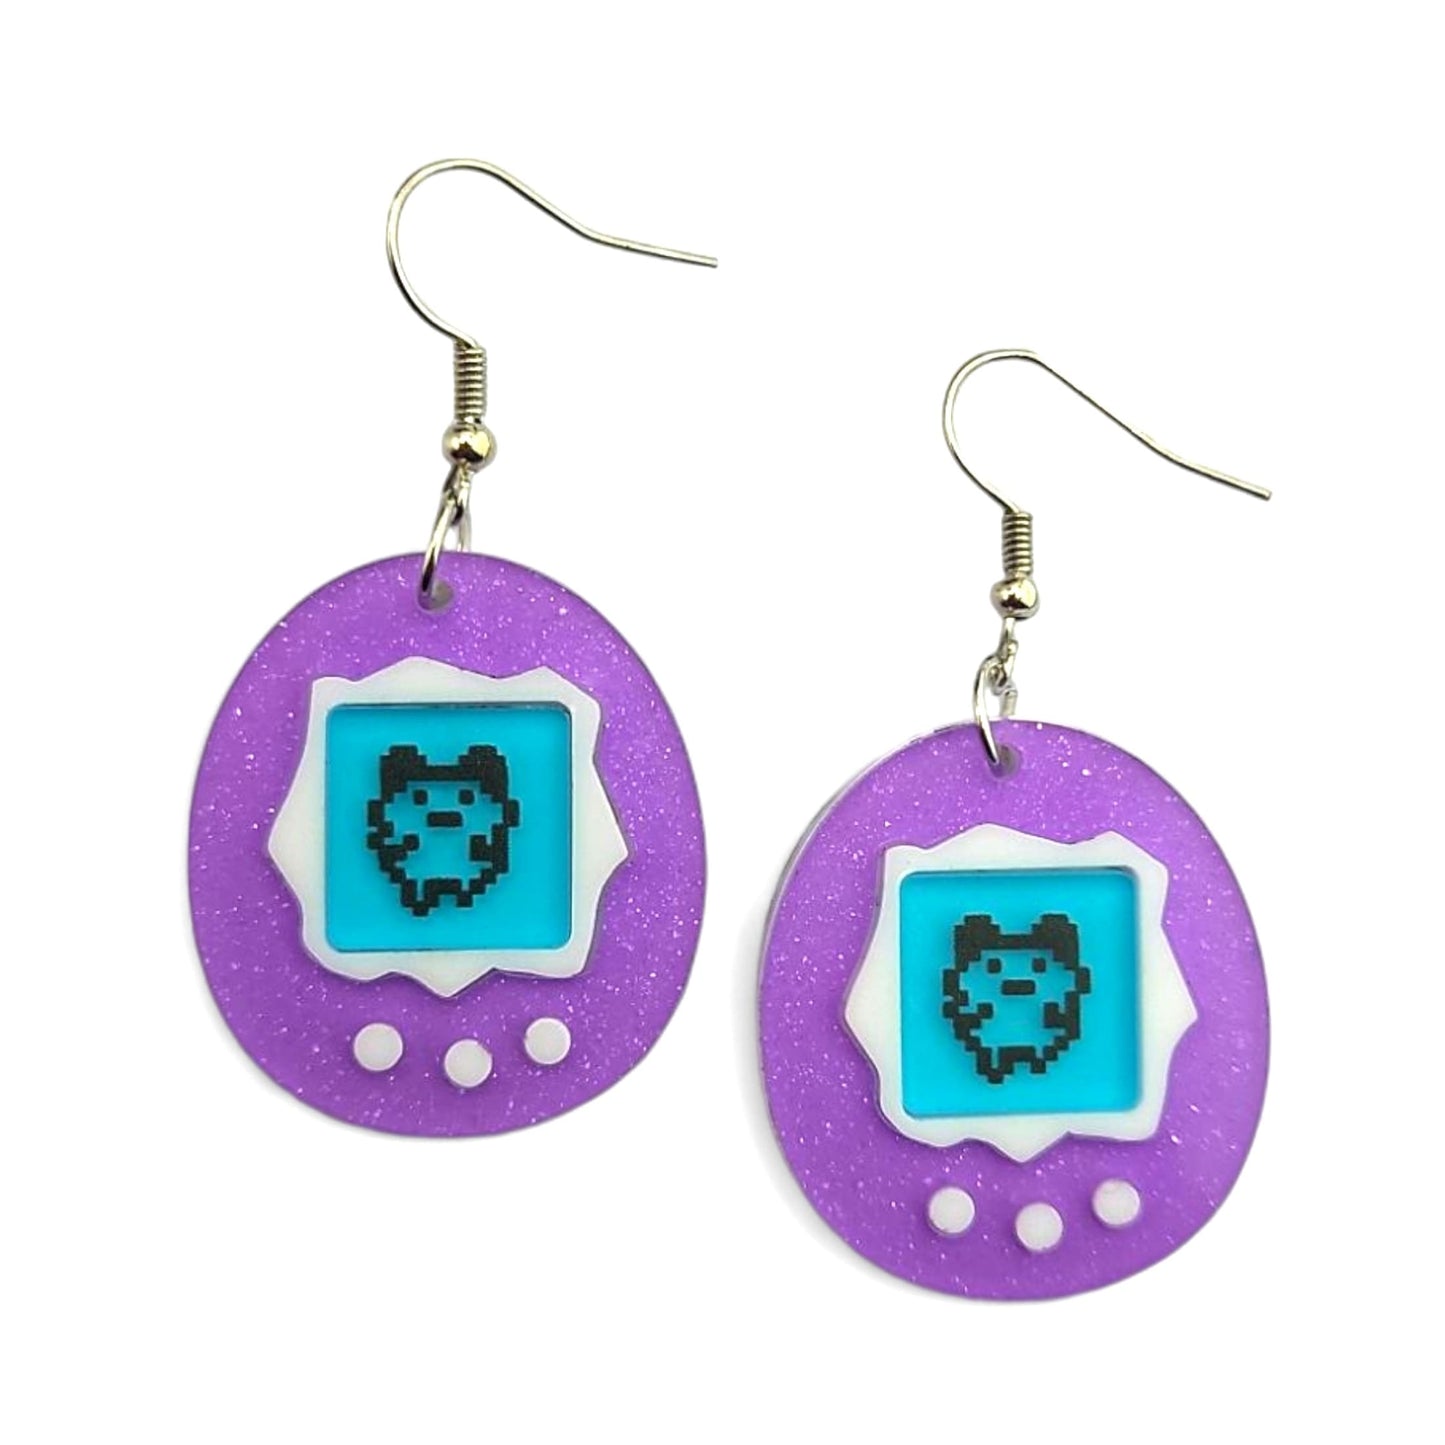 Tamagotchi Earrings from Confetti Kitty, Only 8